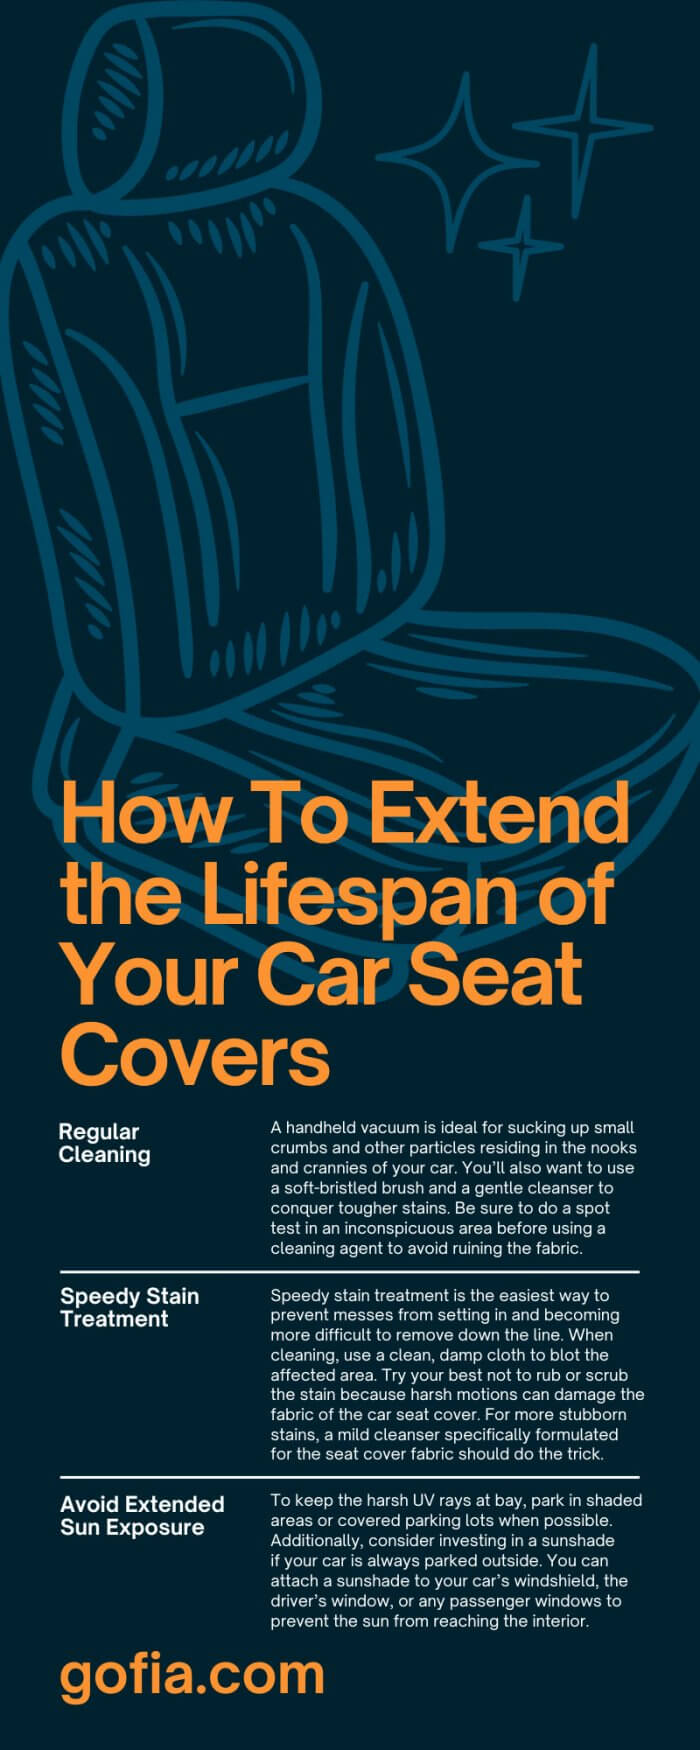 How To Extend the Lifespan of Your Car Seat Covers